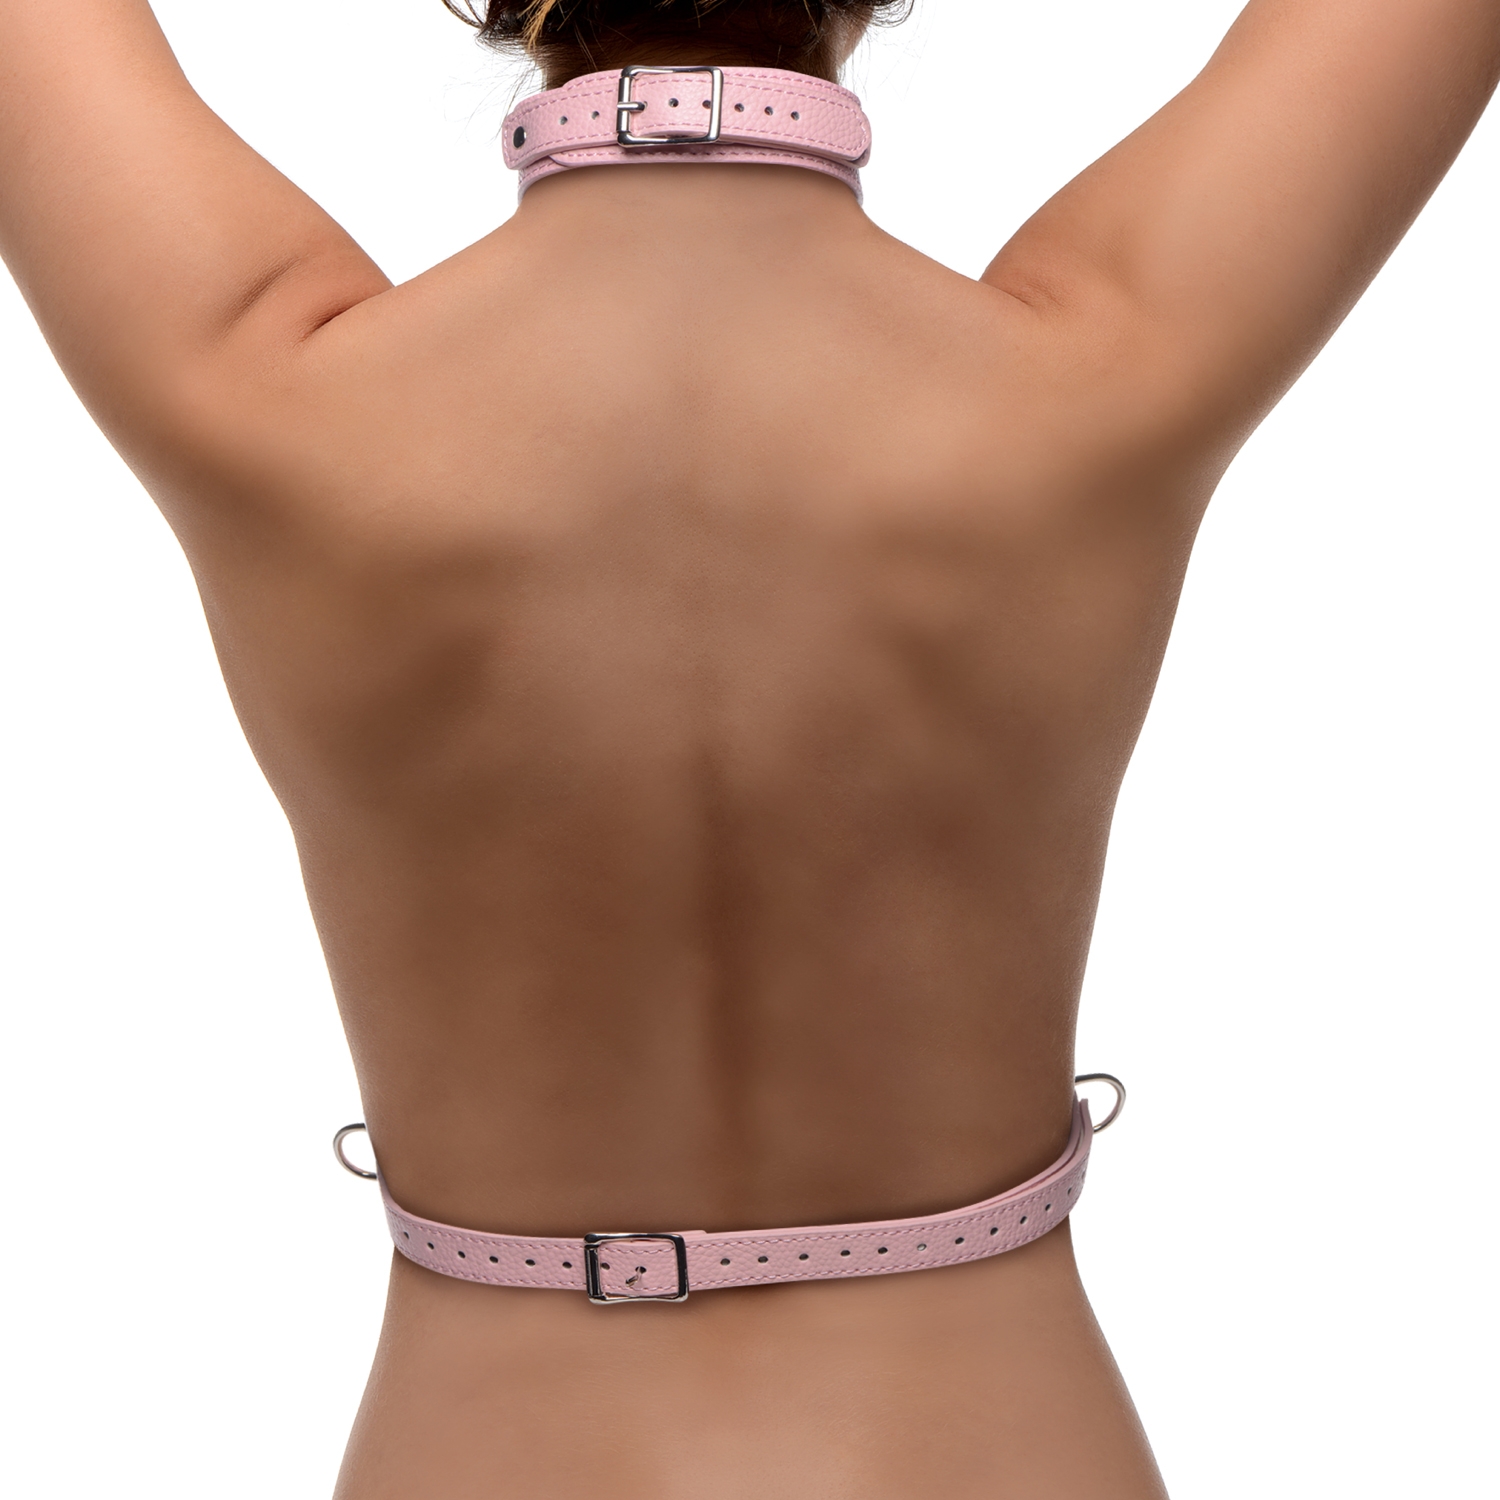 Frisky Miss Behaved Pink Chest Harness - Rosa